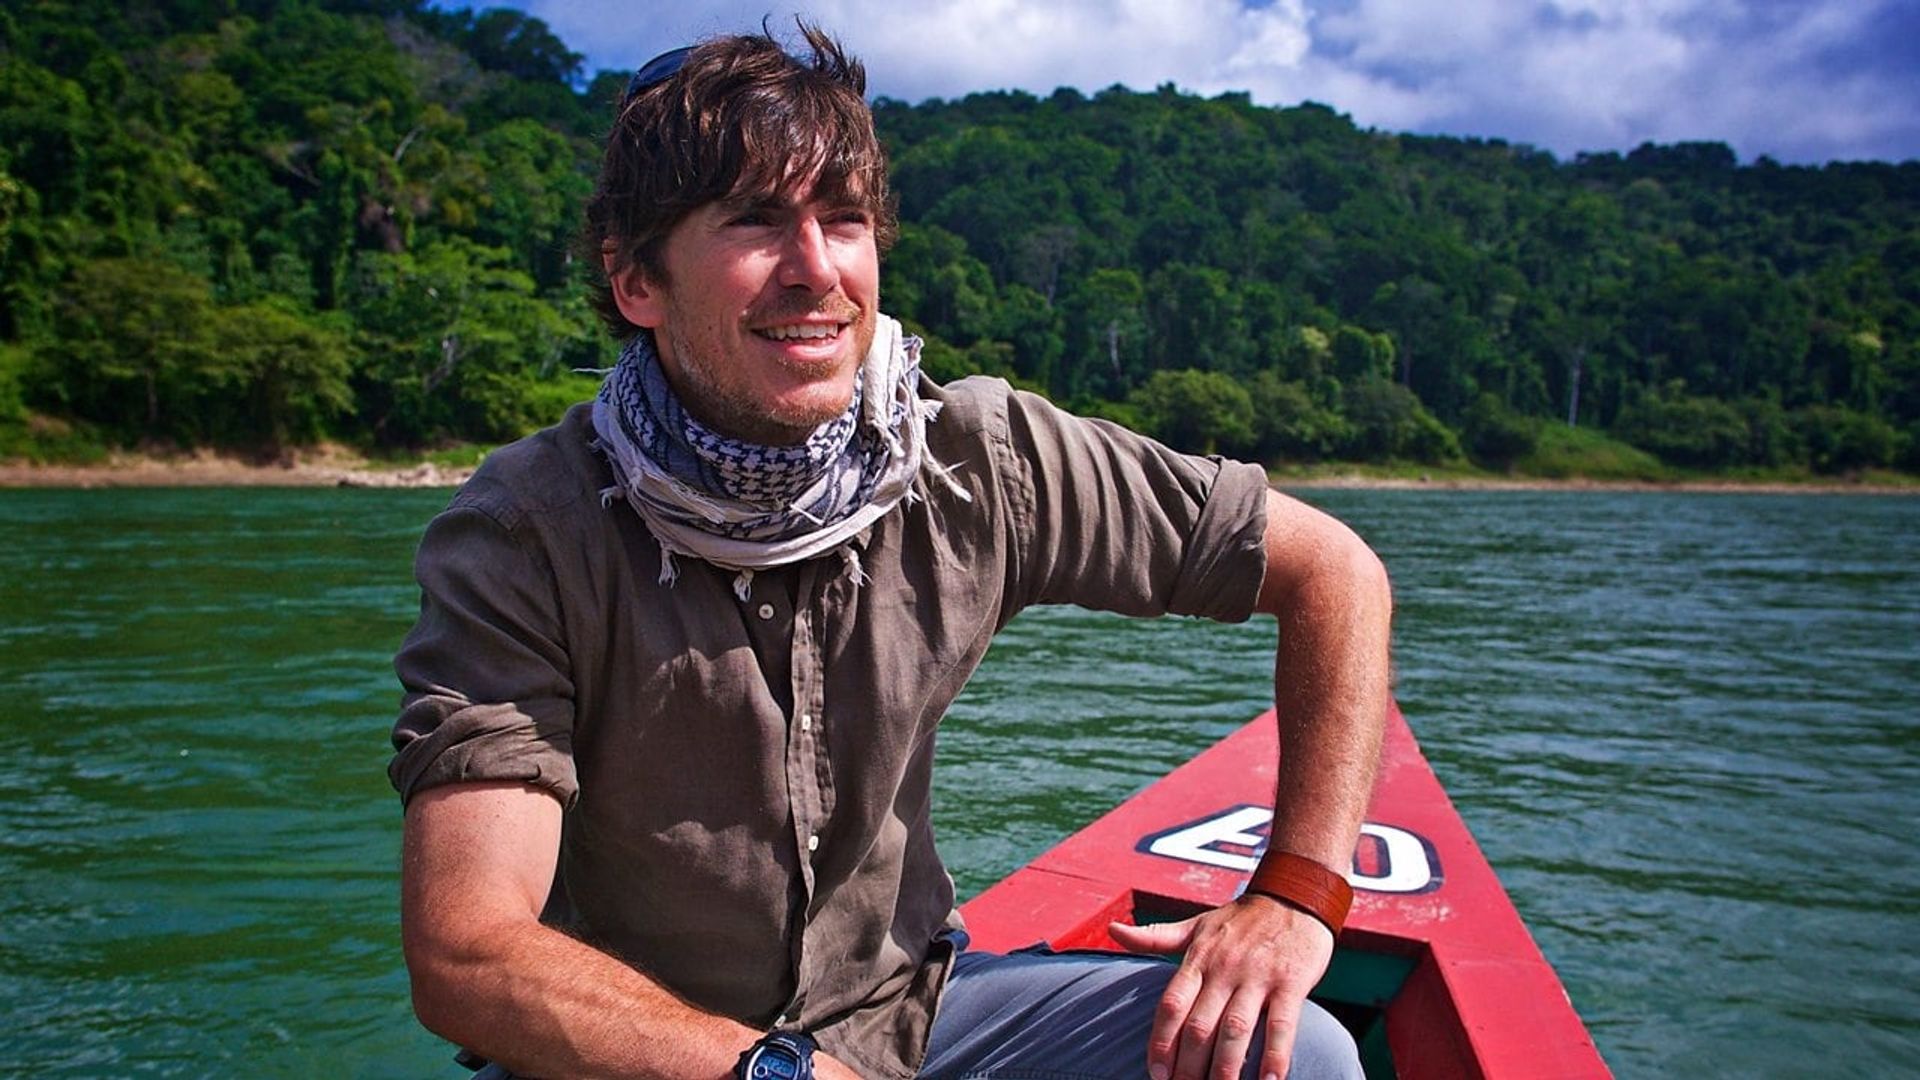 The Americas with Simon Reeve background